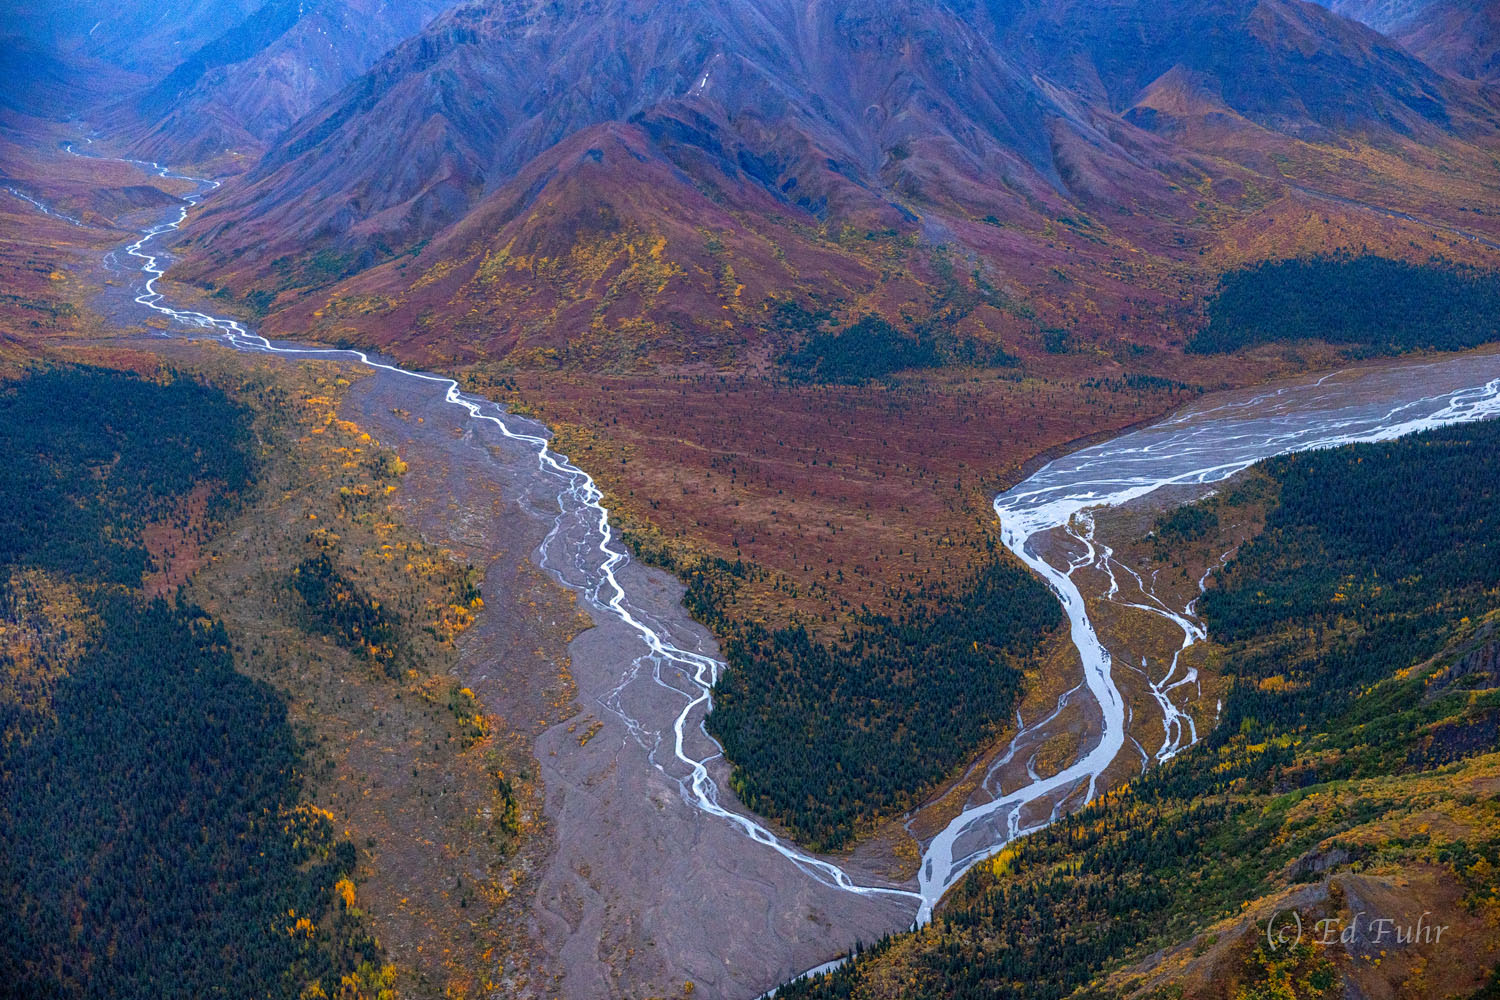 Originating in the Alaskan Range, the braids of the Toklat River (l) and Toklat River East Fork (r) merge by Wyoming Hills before...